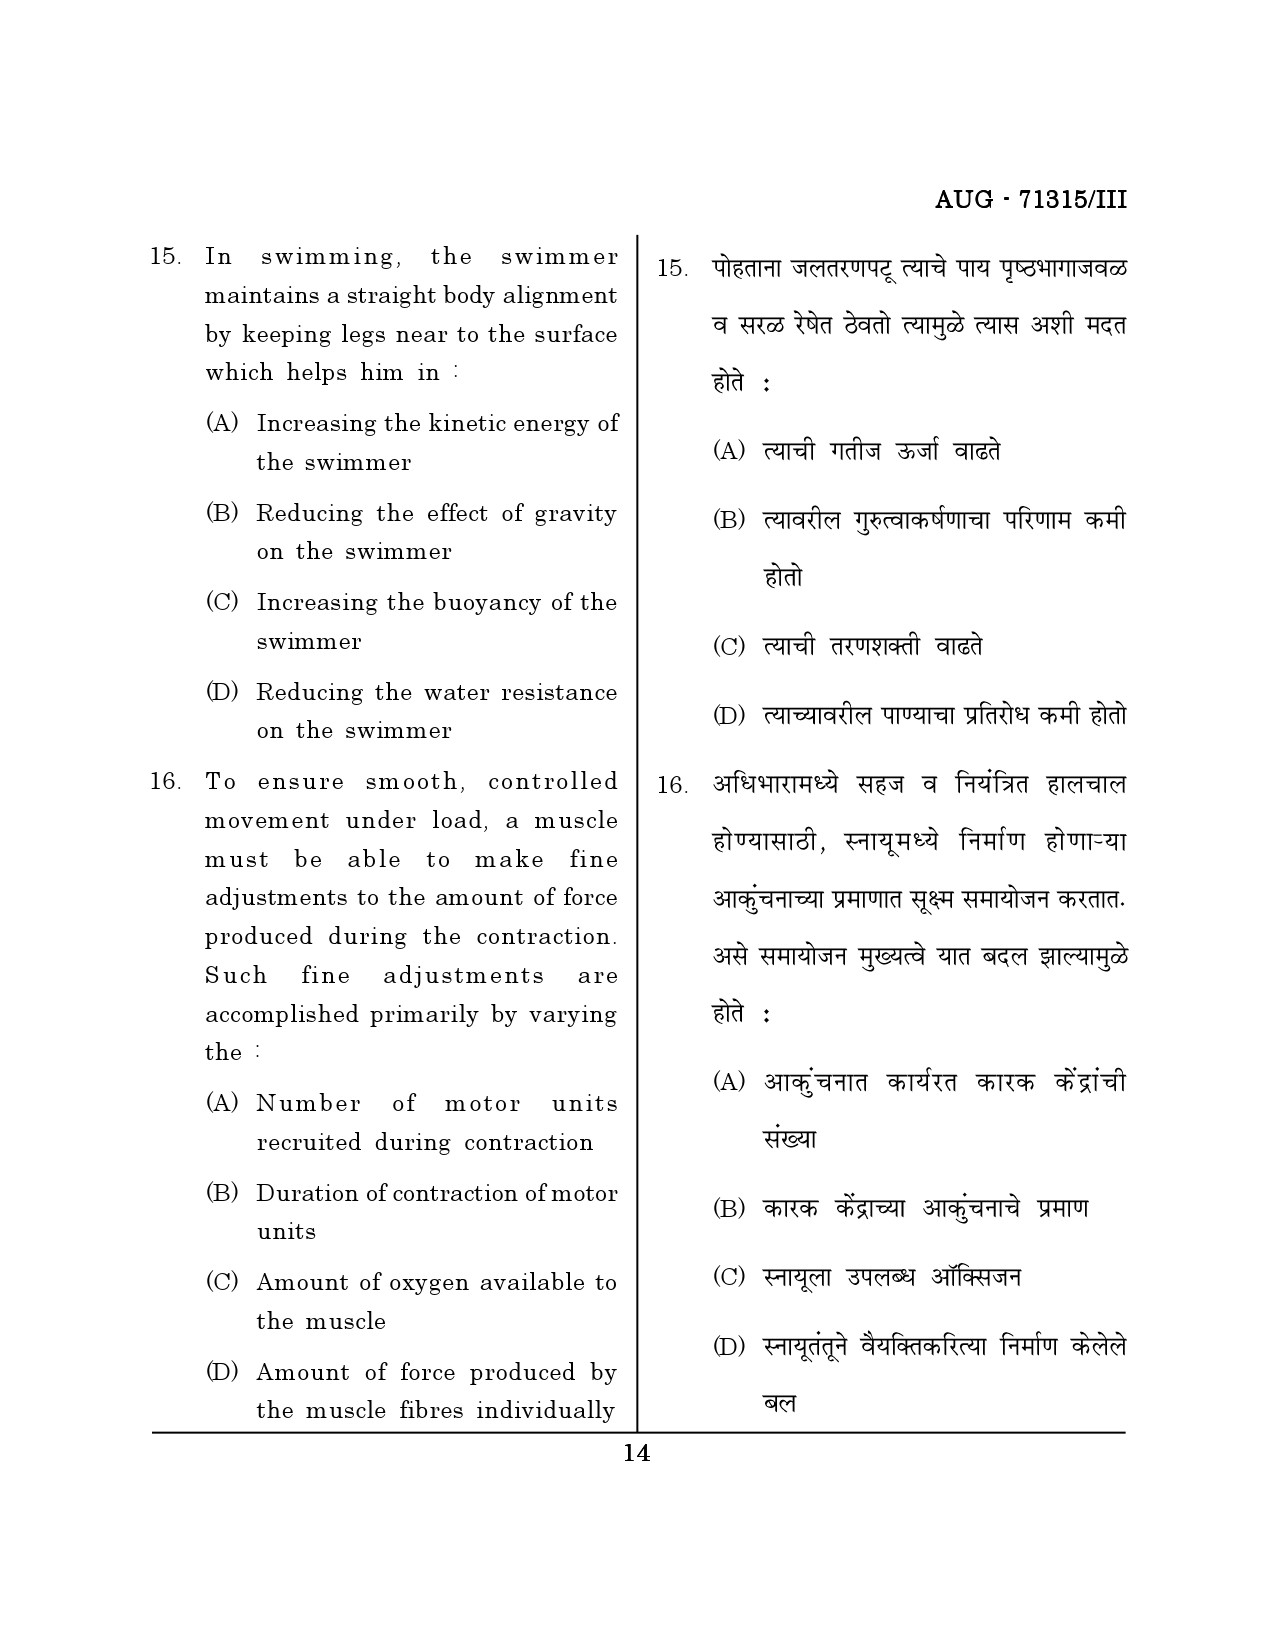 Maharashtra SET Physical Education Question Paper III August 2015 13